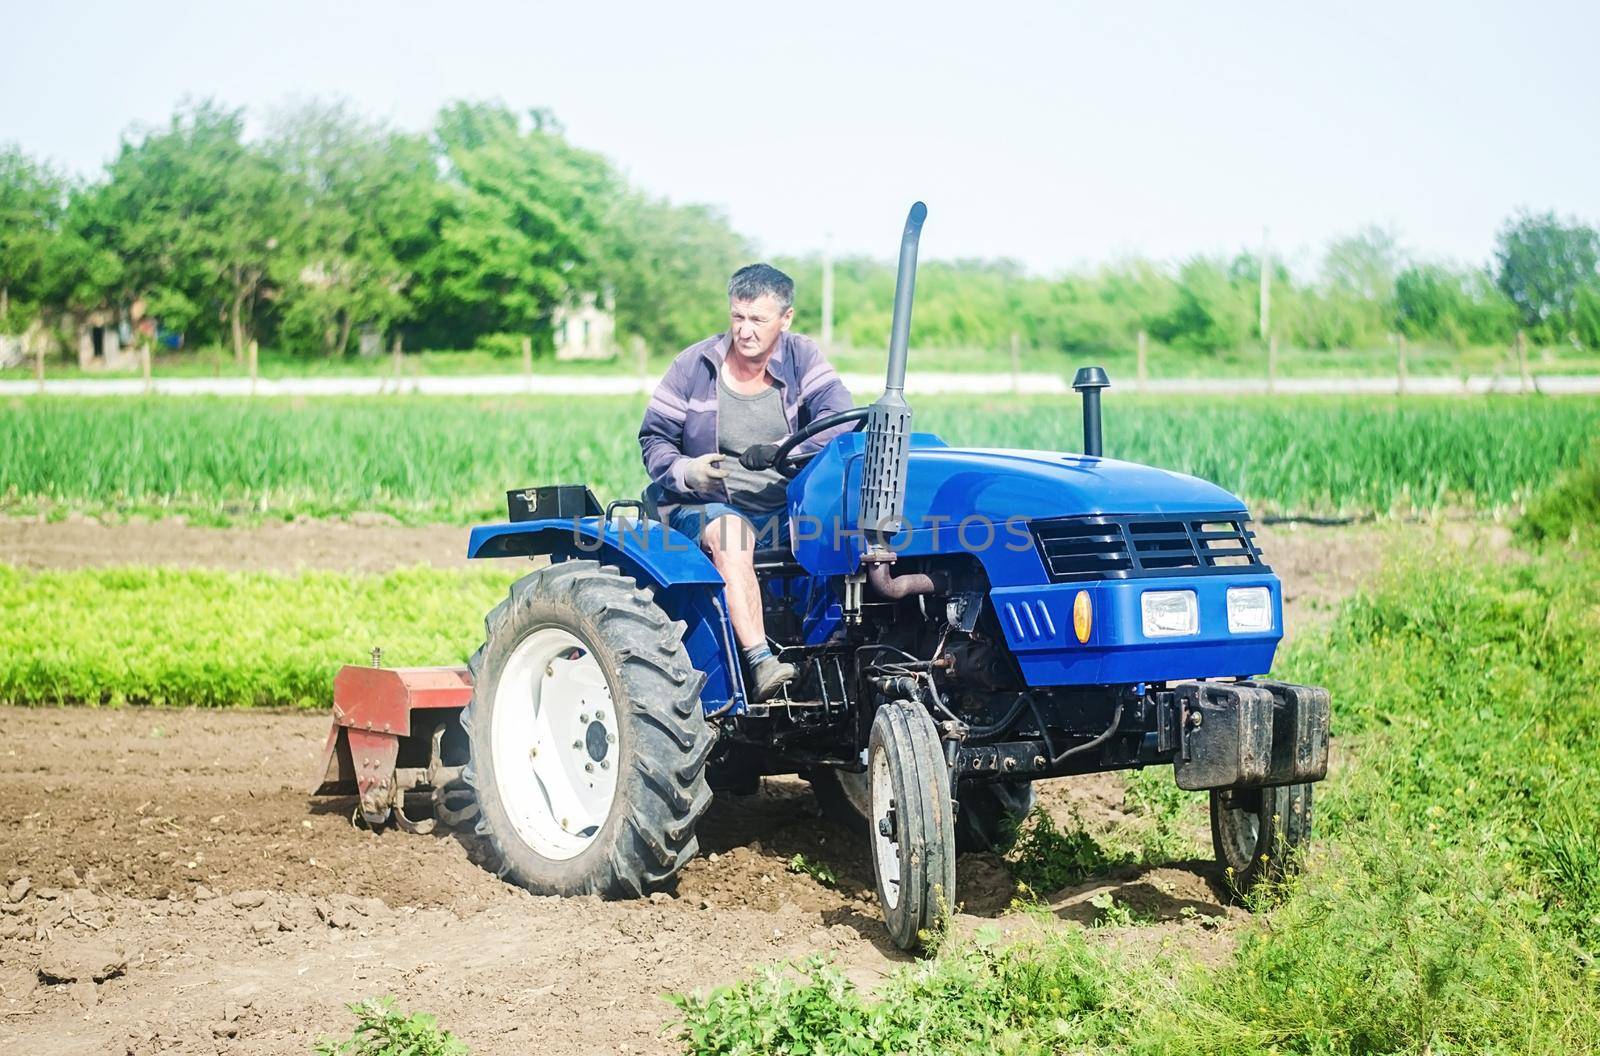 A farmer drives a tractor on a farm field. Agricultural cultivation technology equipment and technical transport. Loosening the surface, cultivating land for further planting. Farmer support subsidies by iLixe48